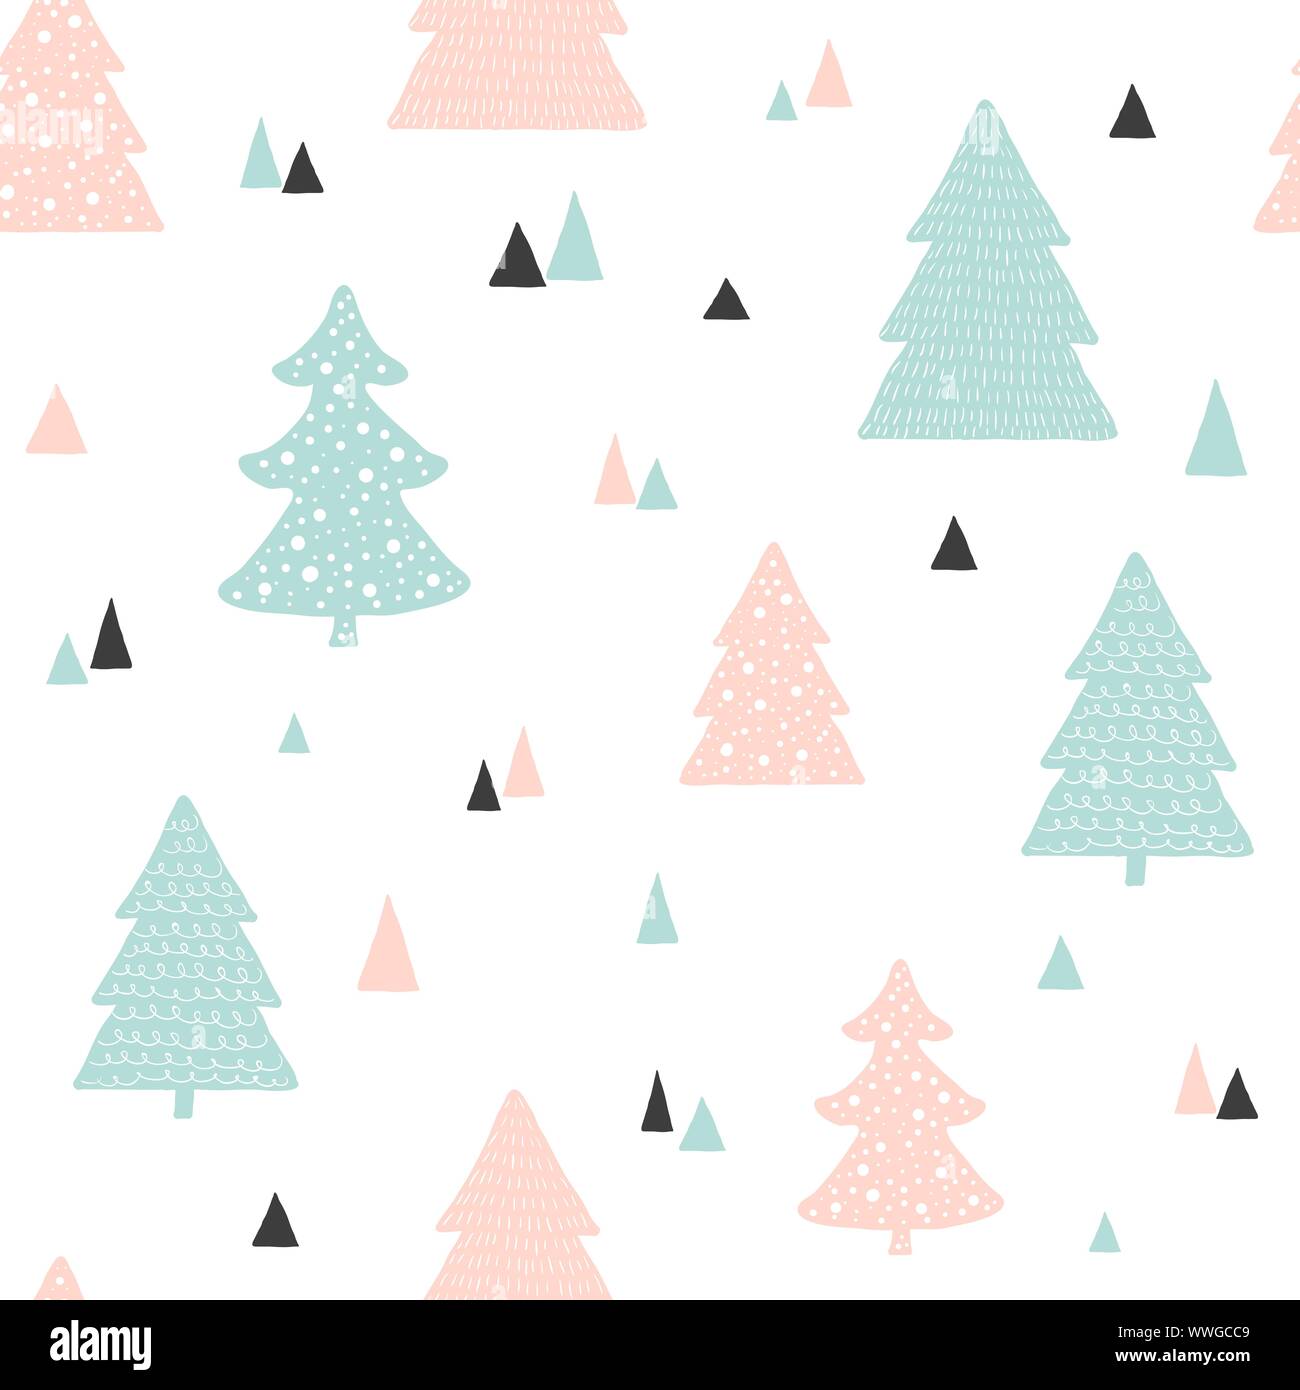 Scandinavian Christmas pattern. Vector childish background with hand drawn Christmas trees Stock Vector